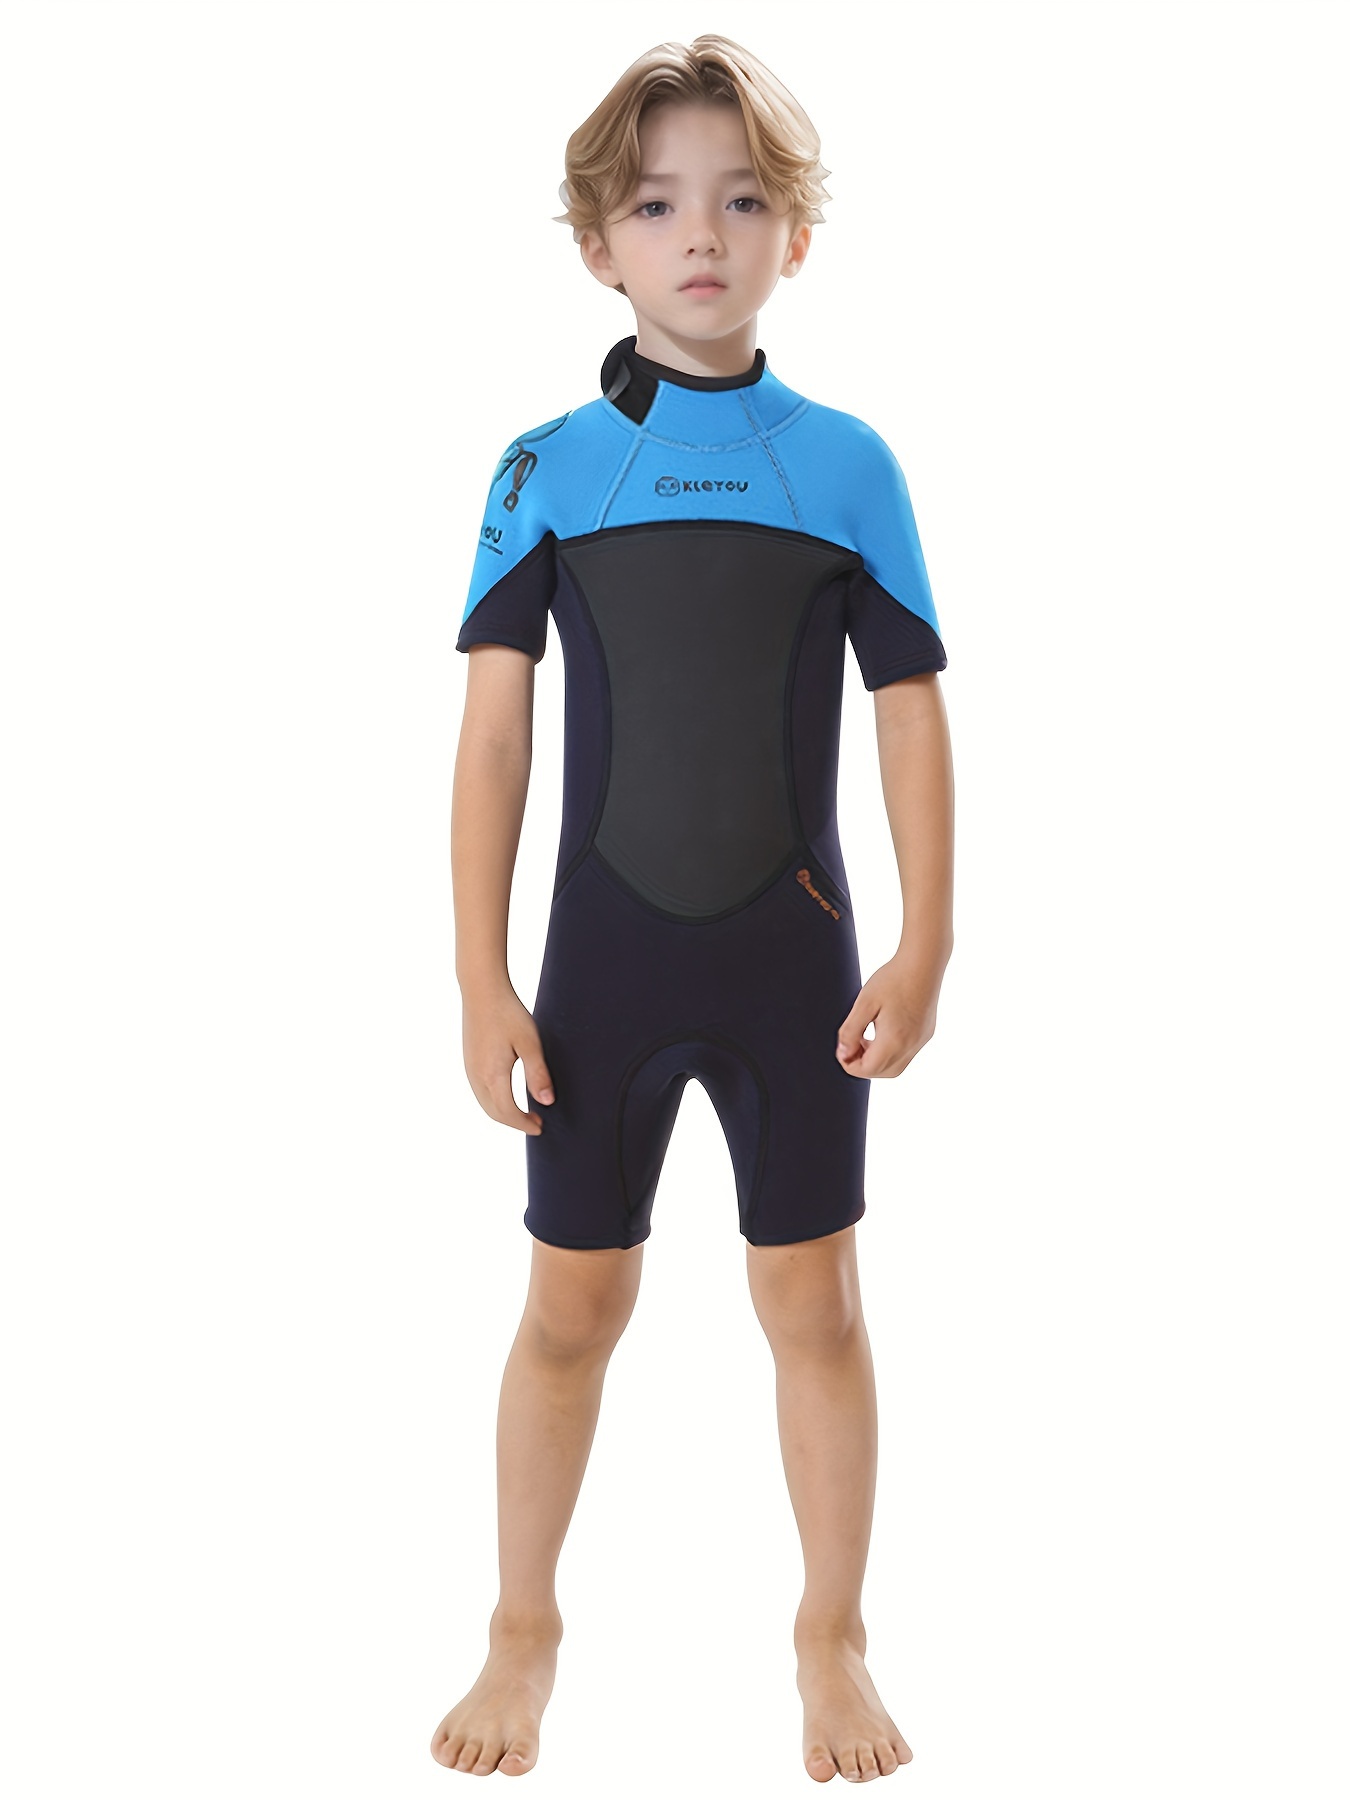 Kids Wetsuit Shorty, 2mm Neoprene Thermal Swimsuit Toddlers Girls